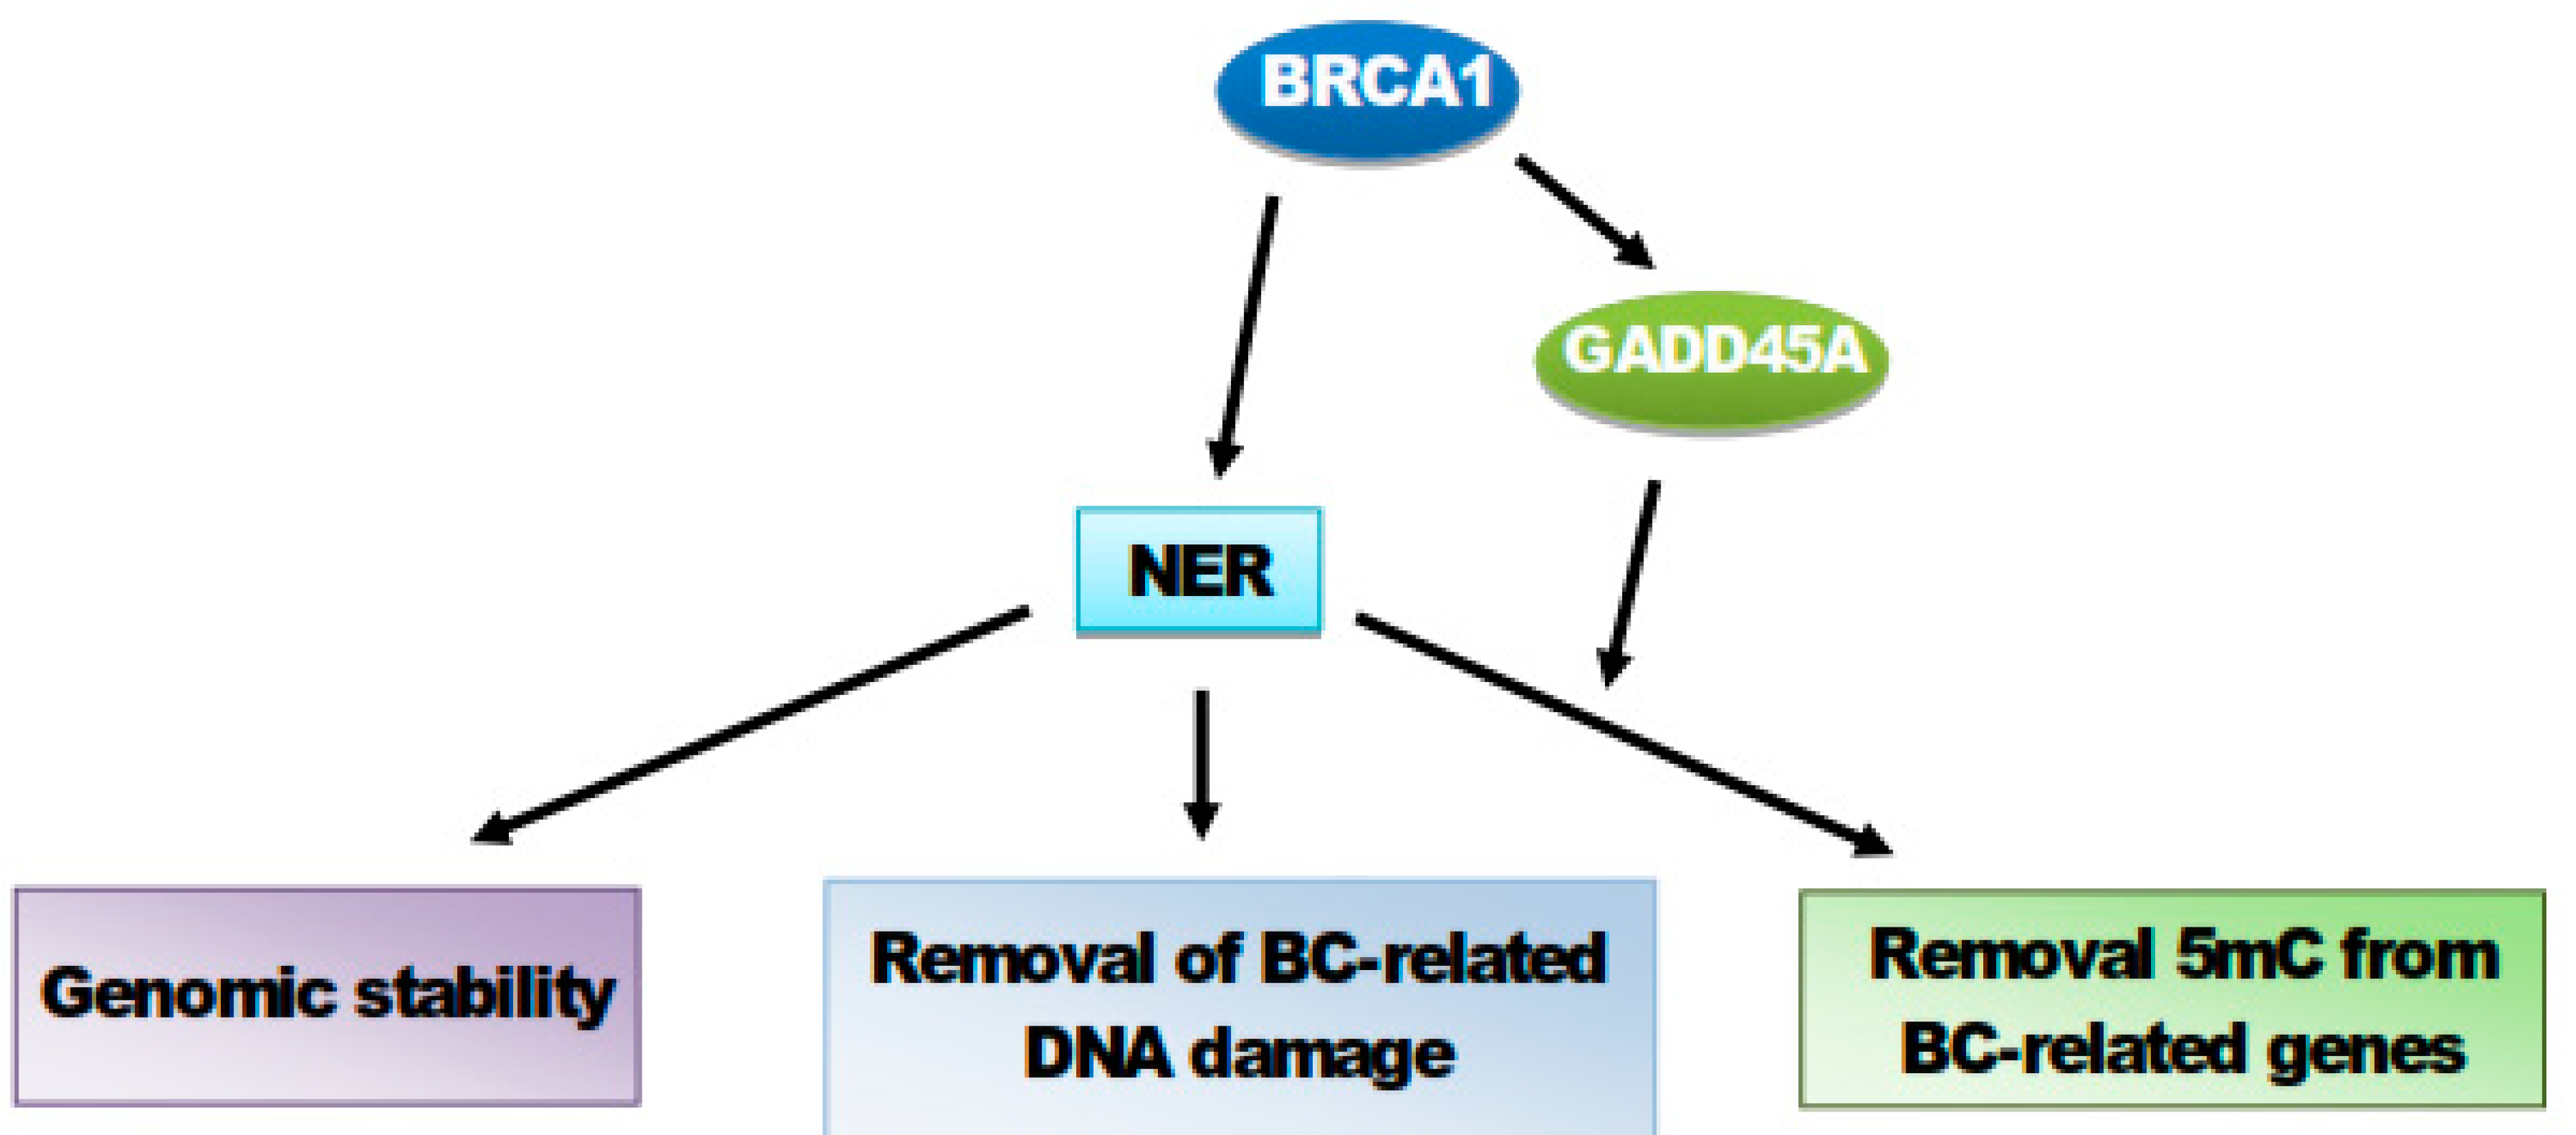 Ijms Free Full Text Interplay Between Brca1 And Gadd45a And Its Potential For Nucleotide Excision Repair In Breast Cancer Pathogenesis Html